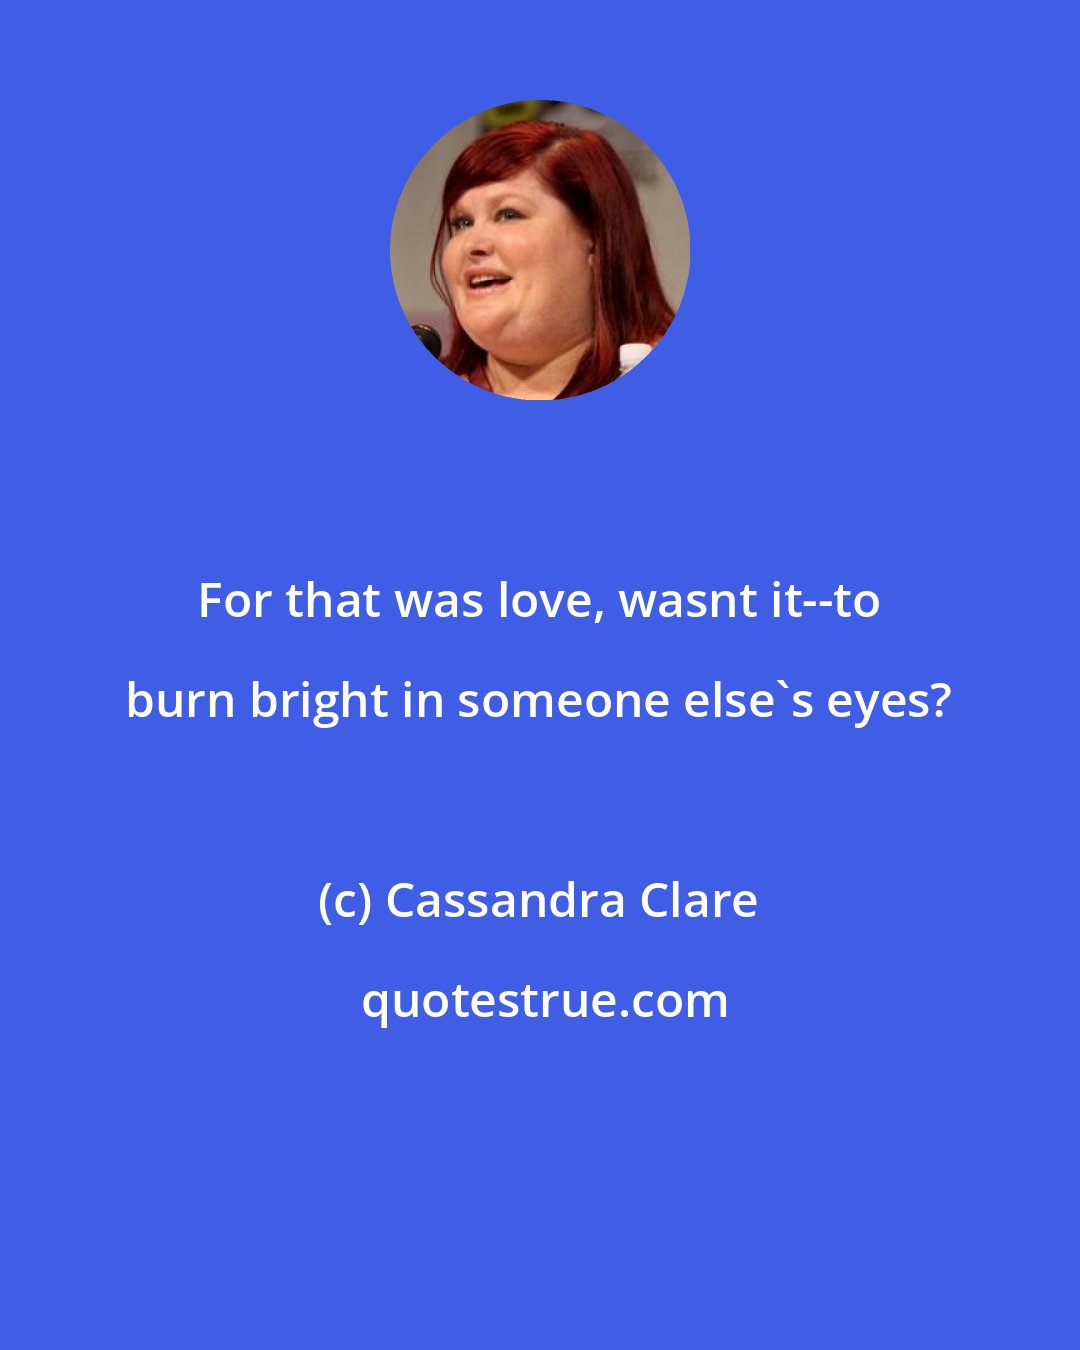 Cassandra Clare: For that was love, wasnt it--to burn bright in someone else's eyes?